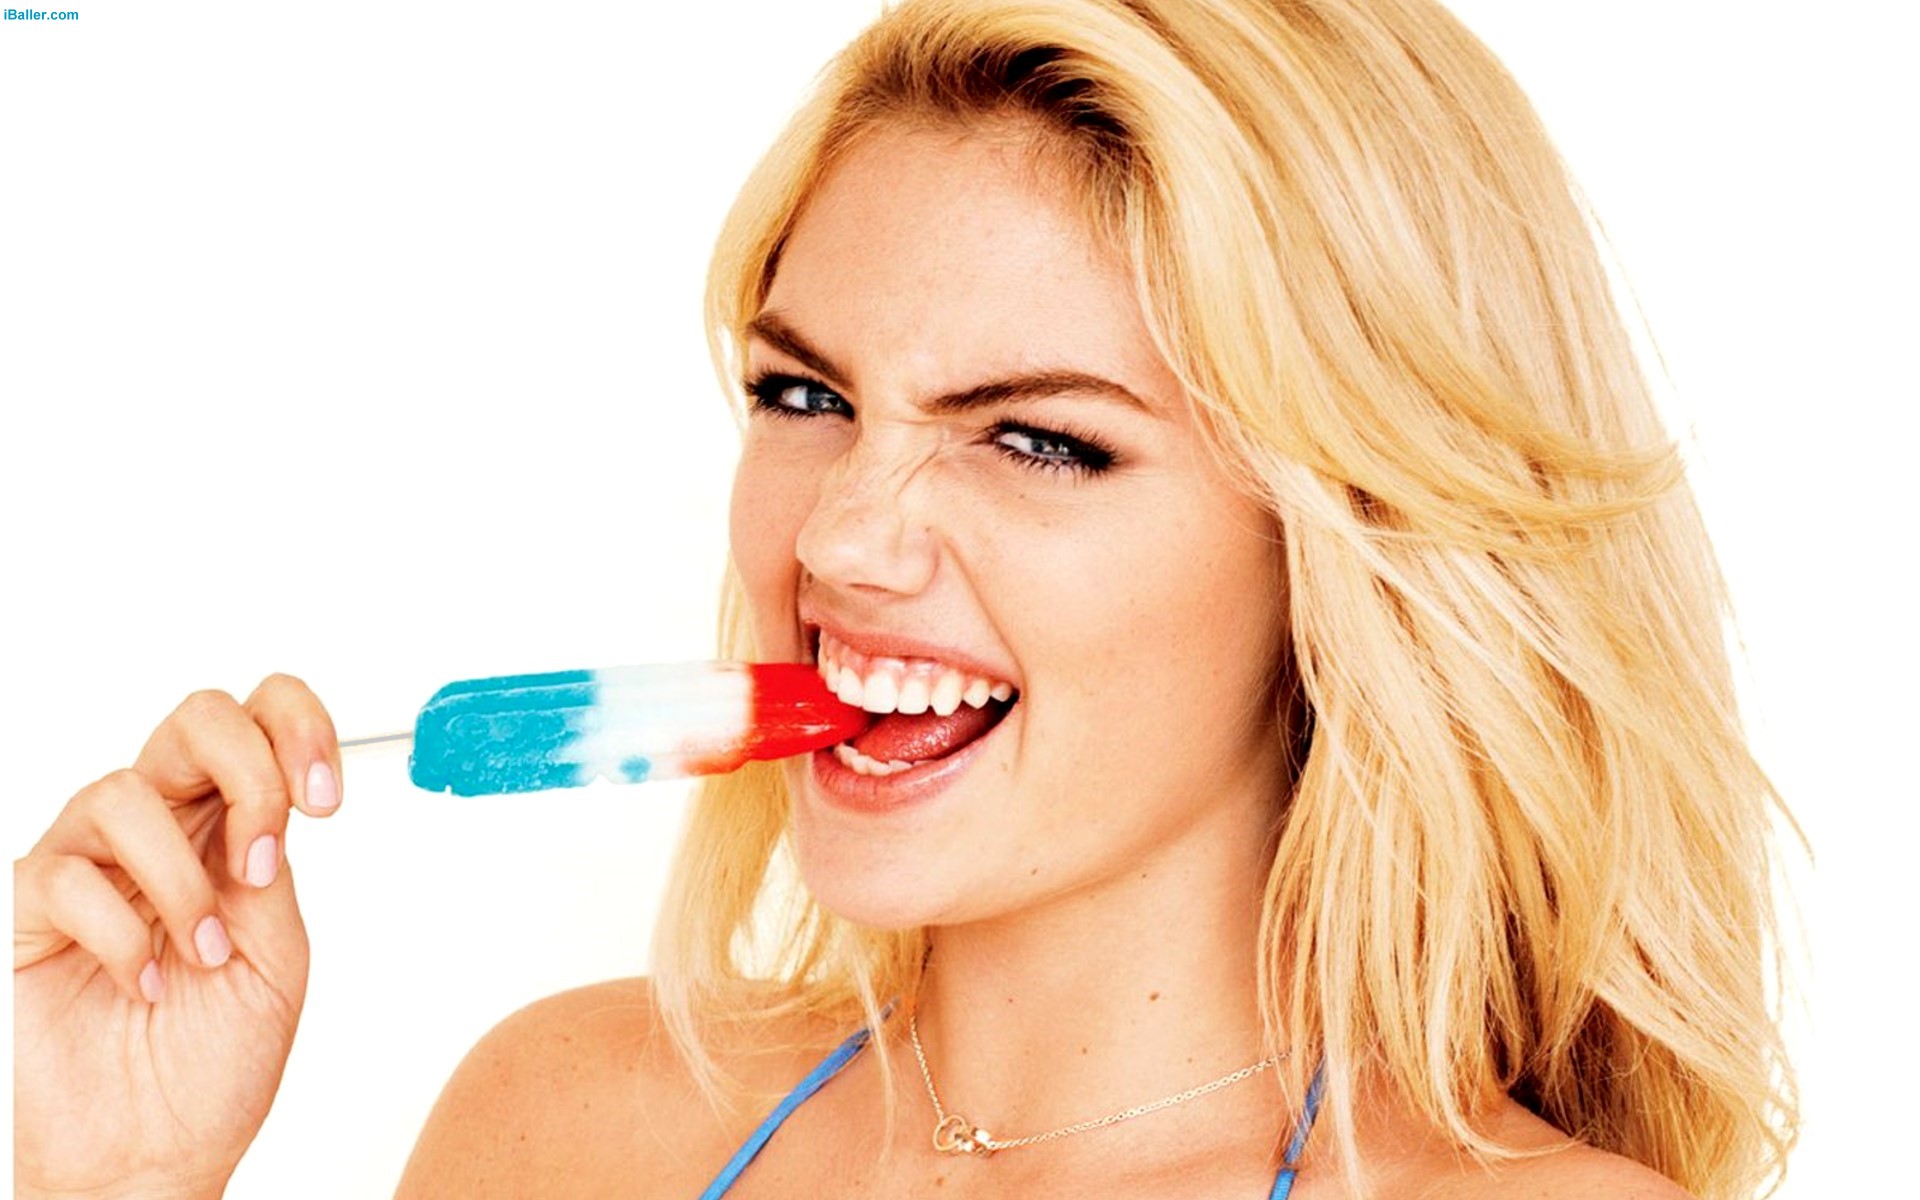 We Provide You To Kate Upton New Wallpaper And Image